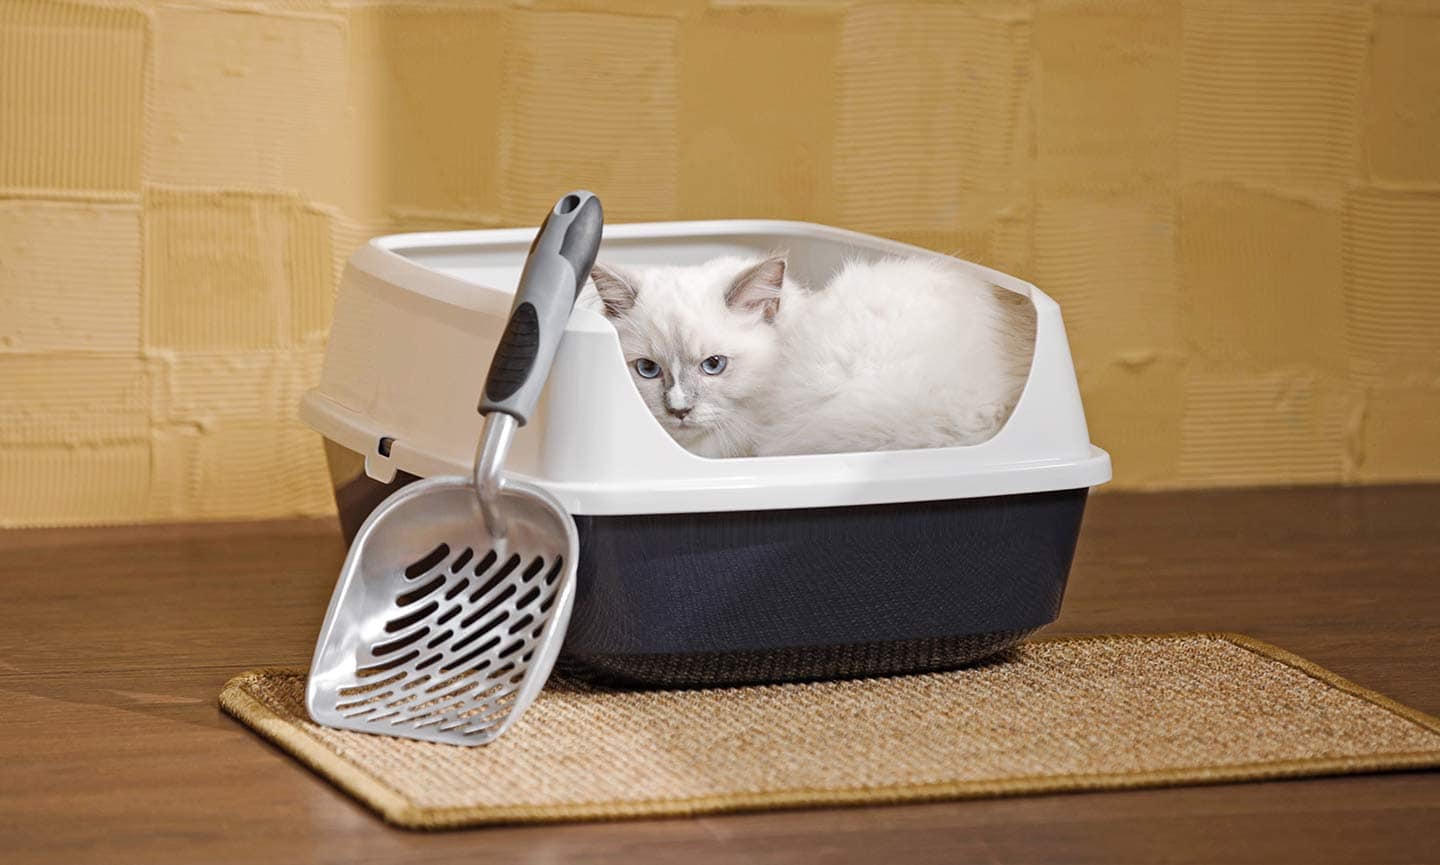 Our guide to kitten litter box training